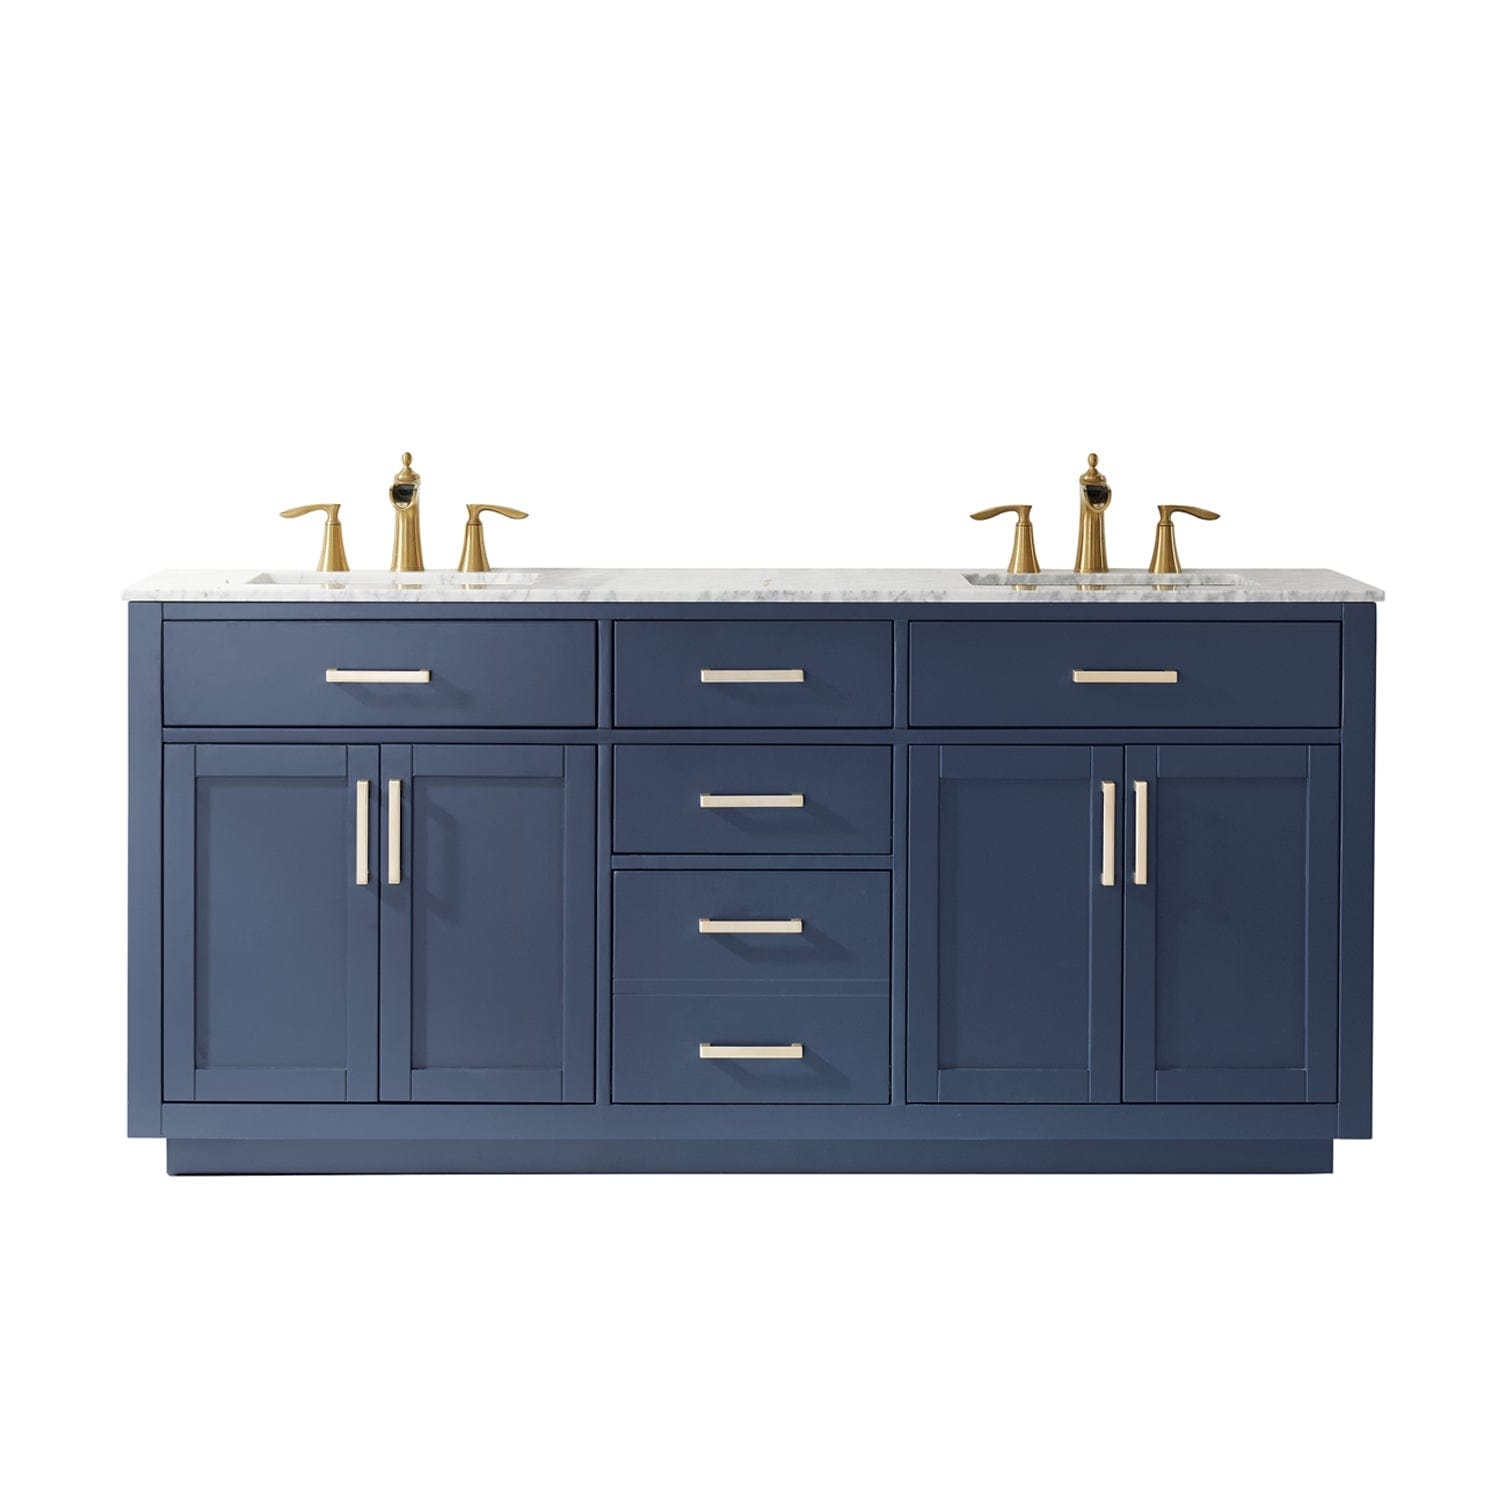 Altair Ivy 72" Double Bathroom Vanity Set in Royal Blue and Carrara White Marble Countertop without Mirror 531072-RB-CA-NM - Molaix631112971300Vanity531072-RB-CA-NM